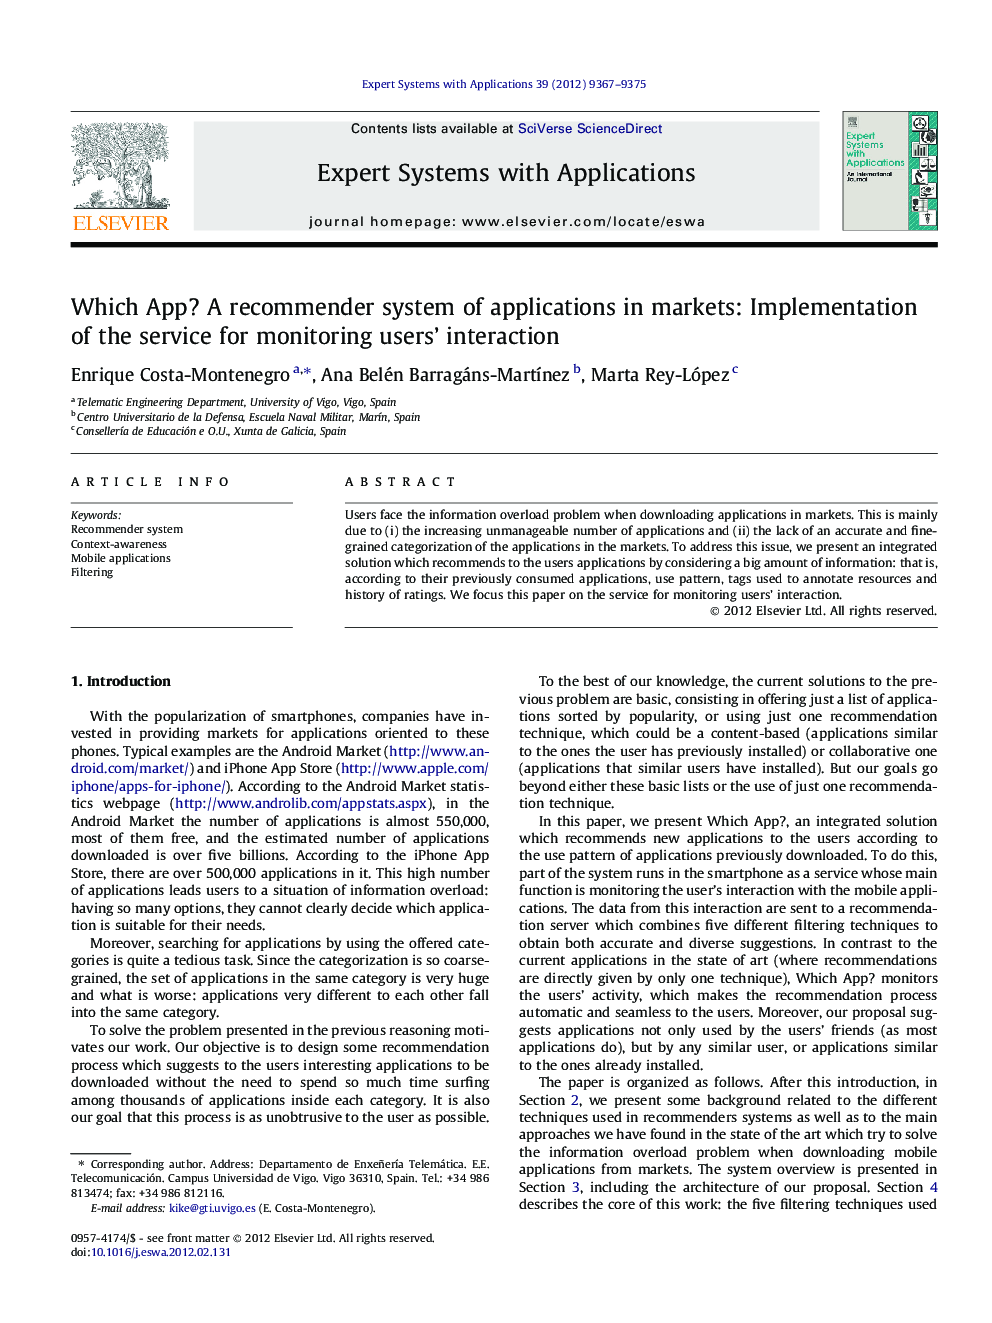 Which App? A recommender system of applications in markets: Implementation of the service for monitoring users' interaction